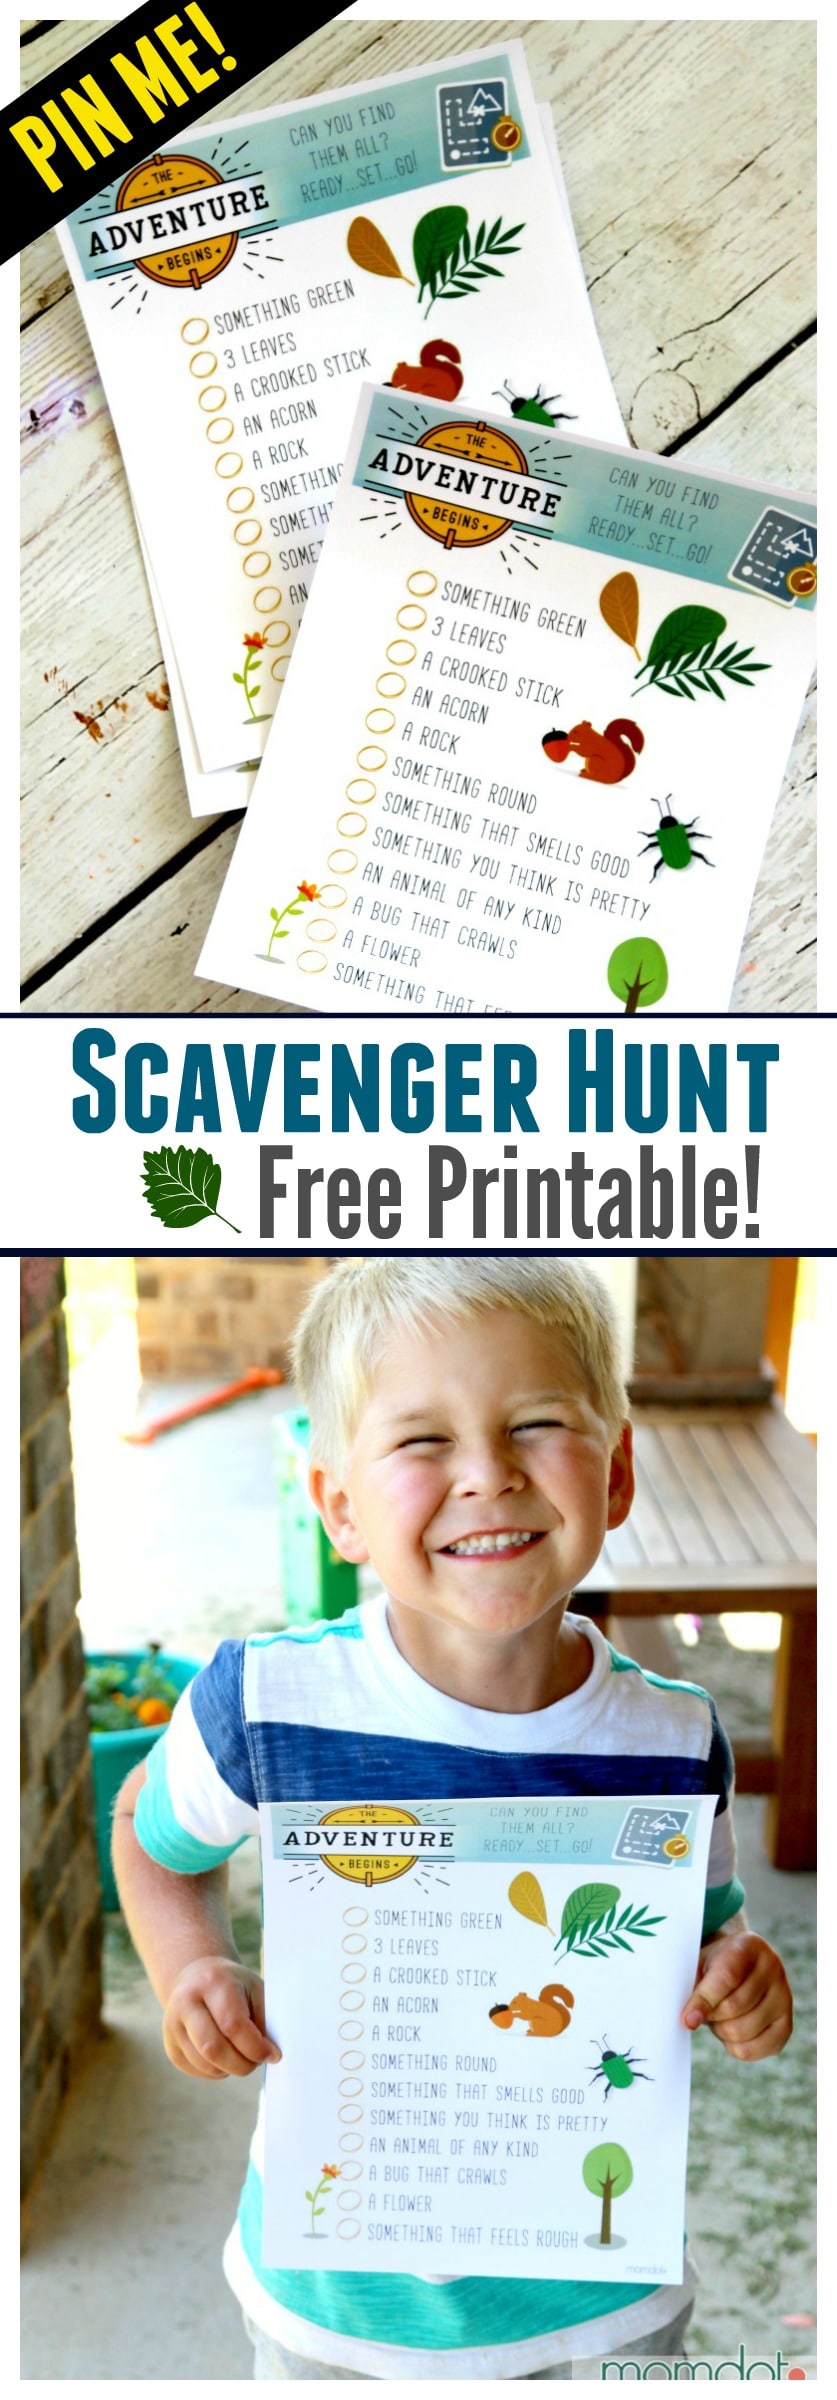 Scavenger Hunt Printable: Snag this free Scavenger Printable for your next summer adventure, perfect for camping or camp themed party and to keep the kids busy at any age!